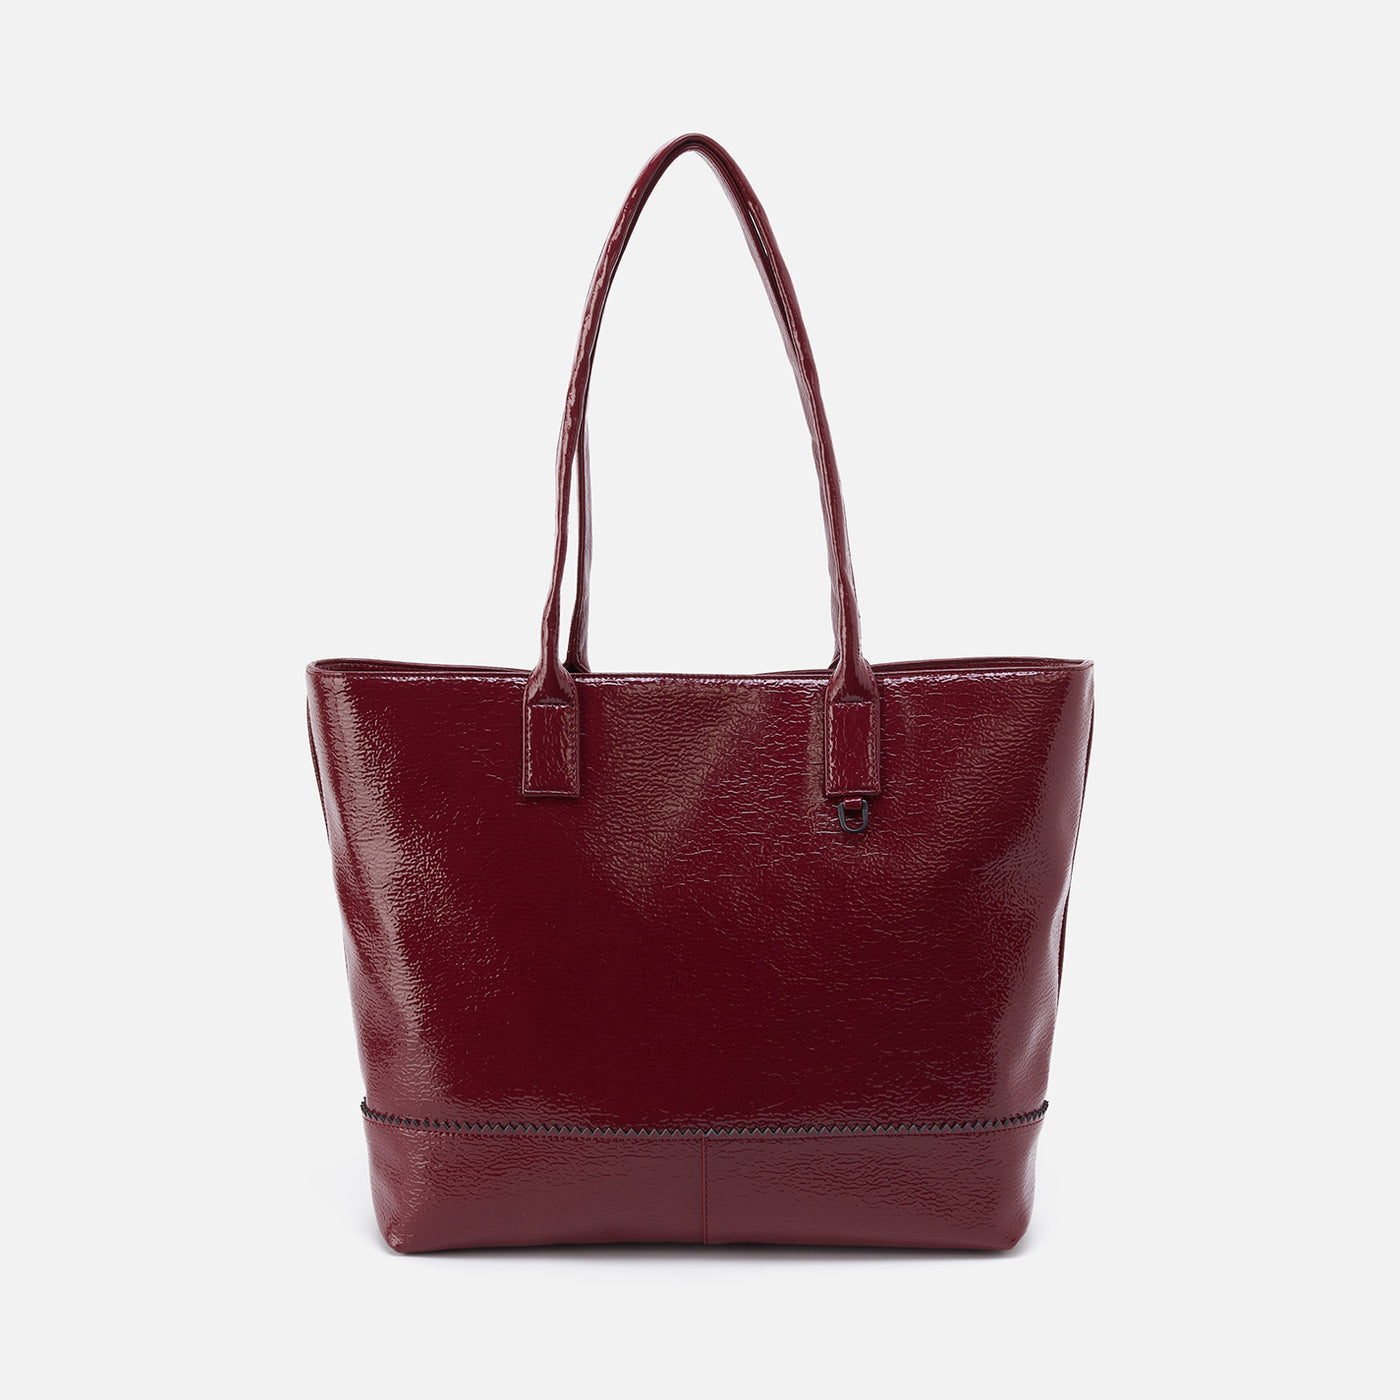 Oxblood Tote | Handmade leather tote bag by KMM & Co.